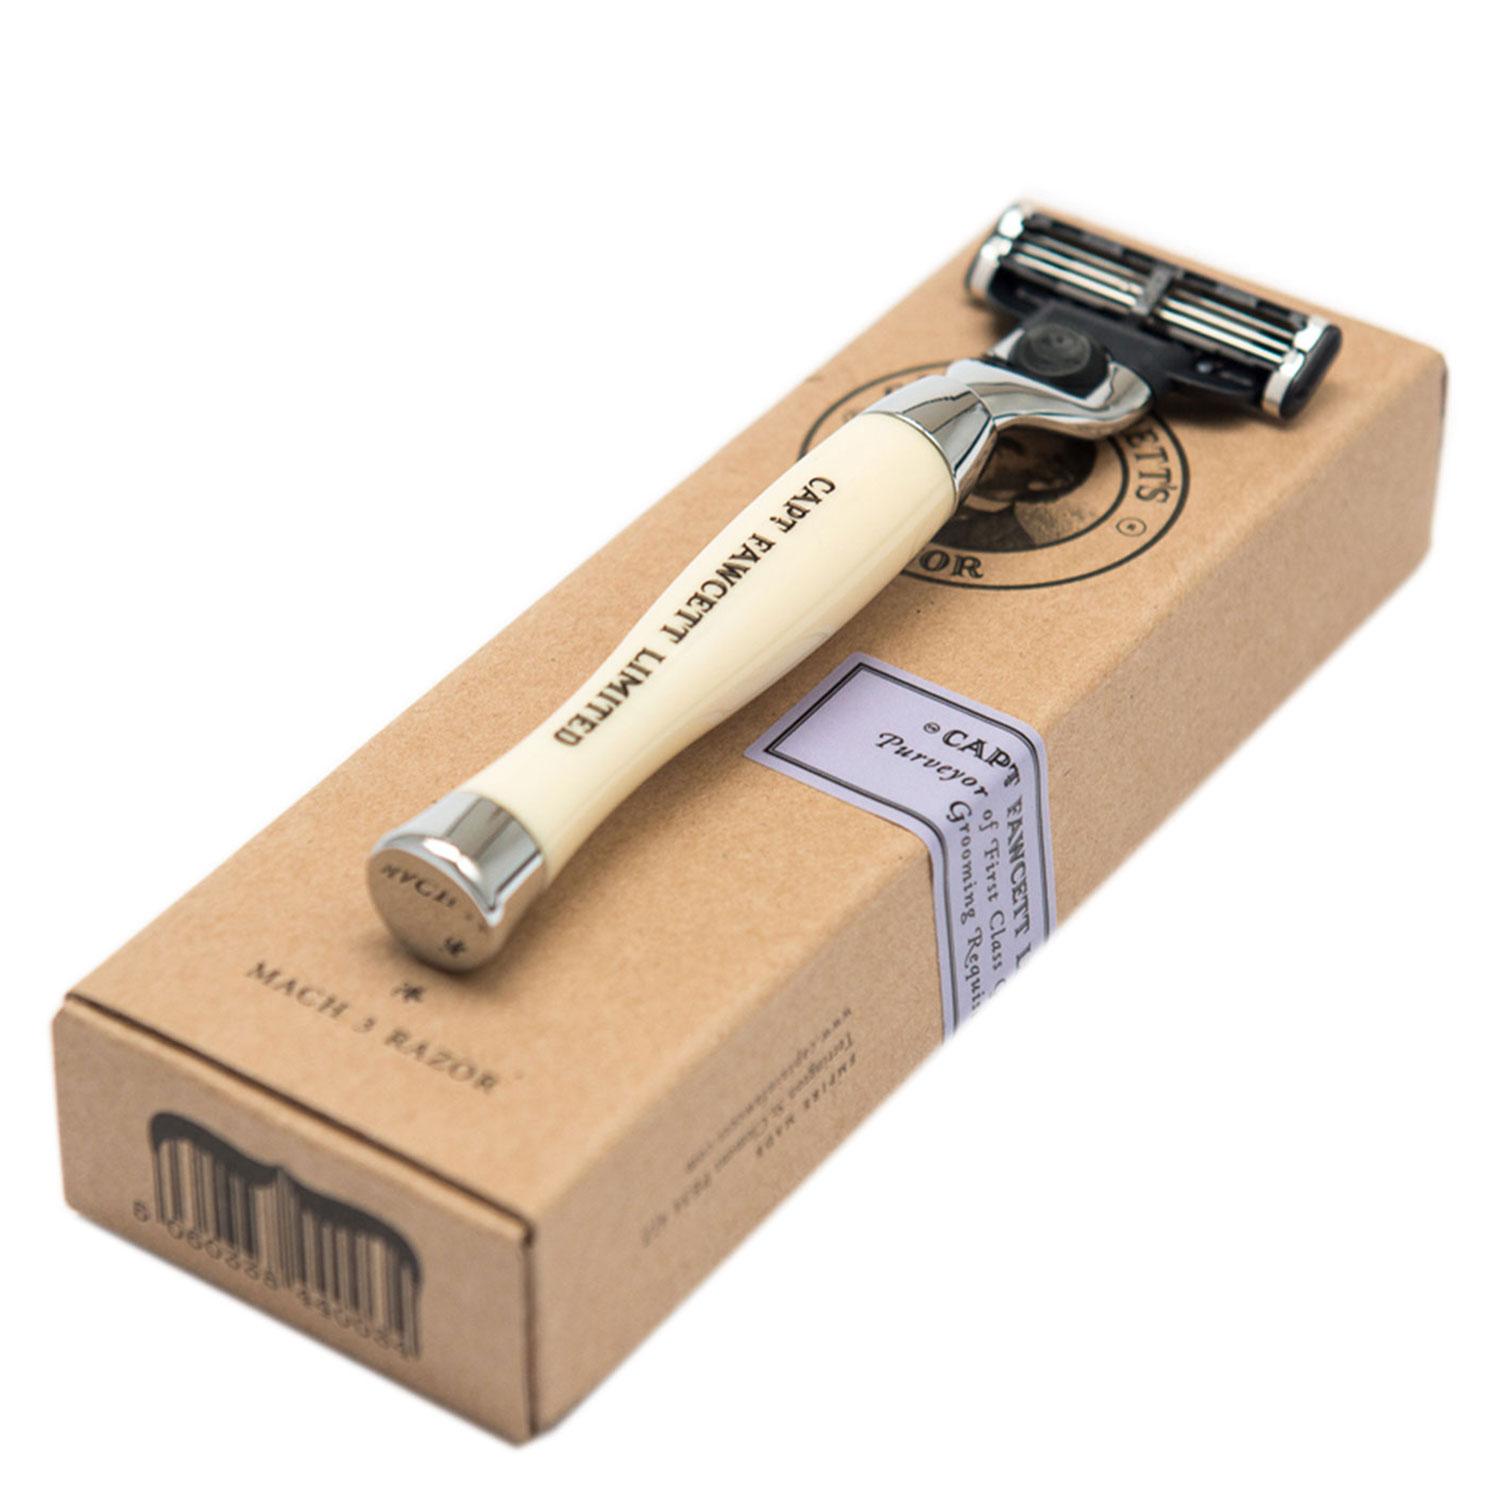 Capt. Fawcett Tools - Finest Hand Crafted Safety Razor